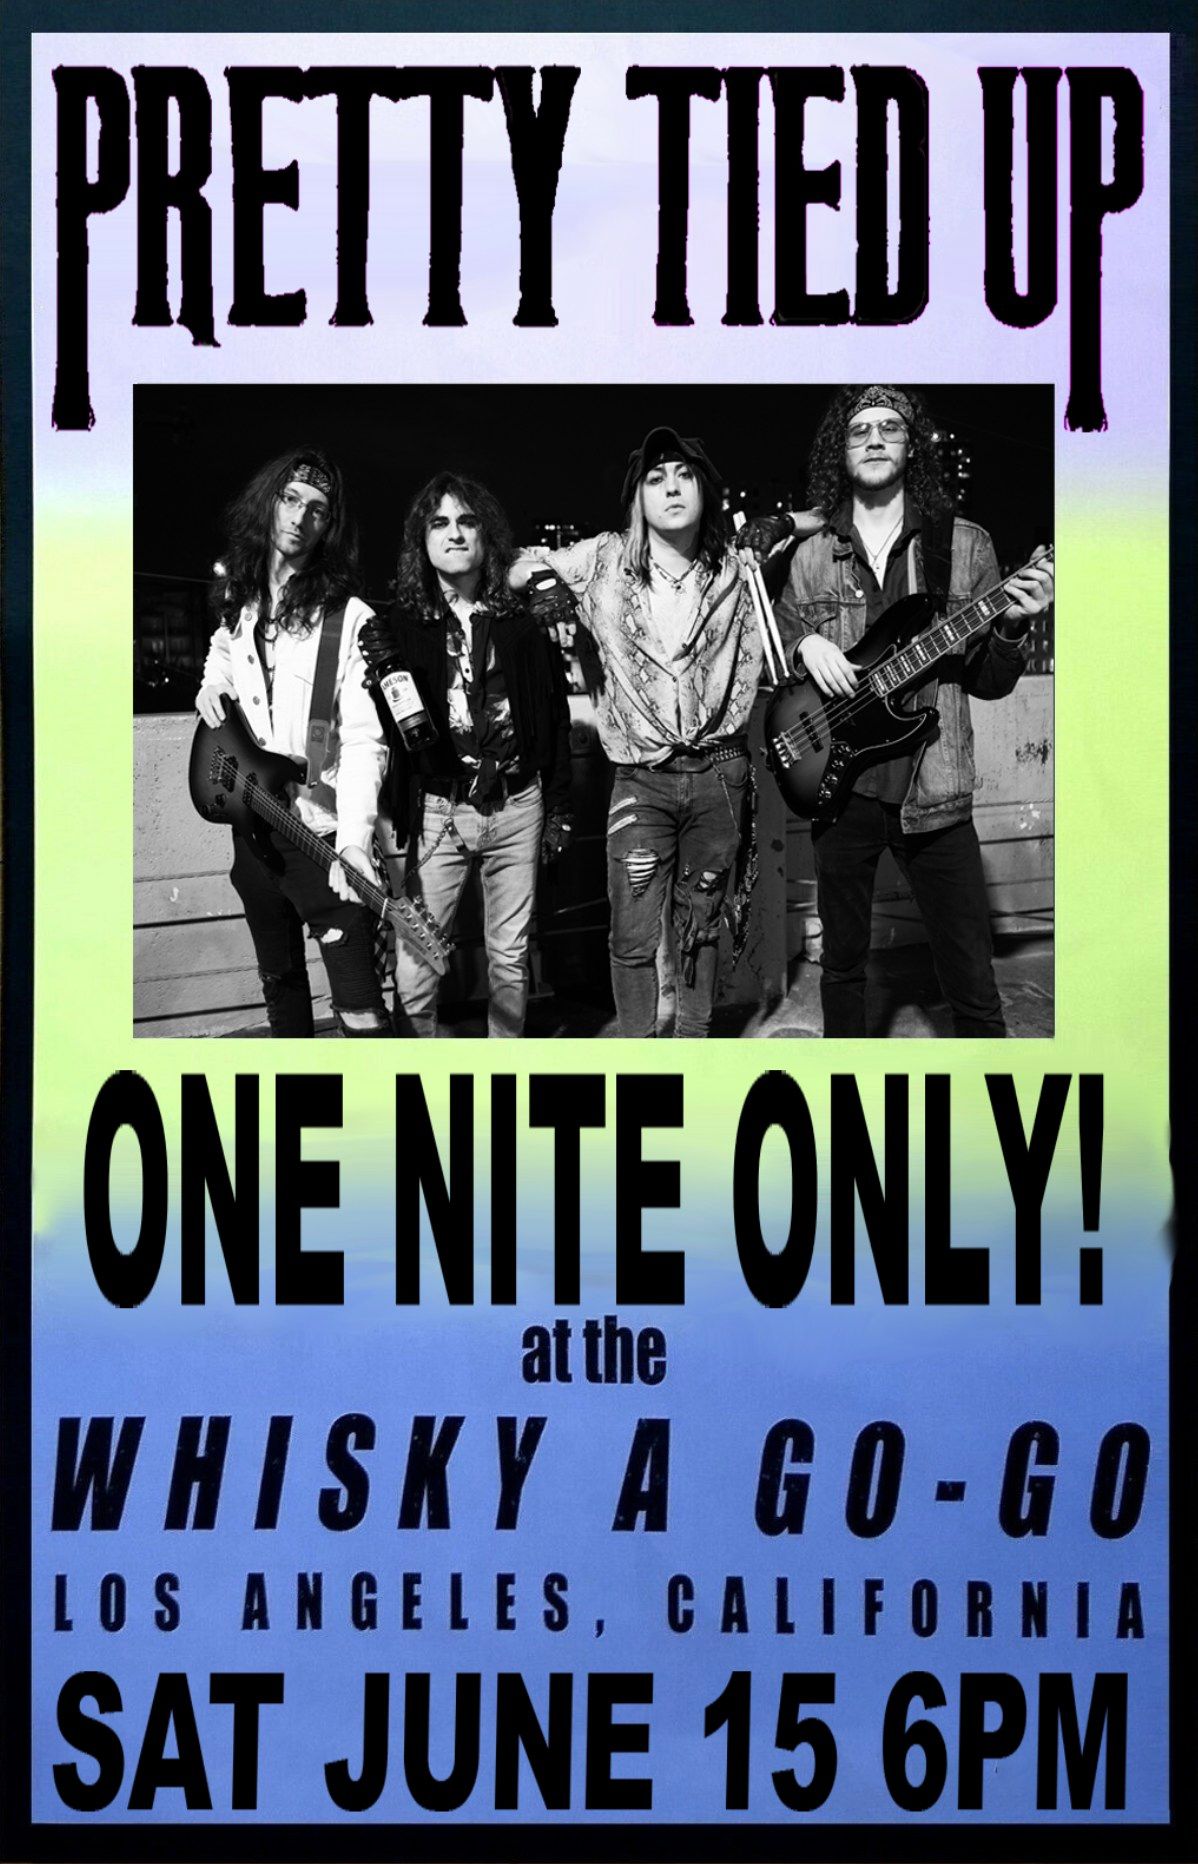 80s rock night at the Whisky 